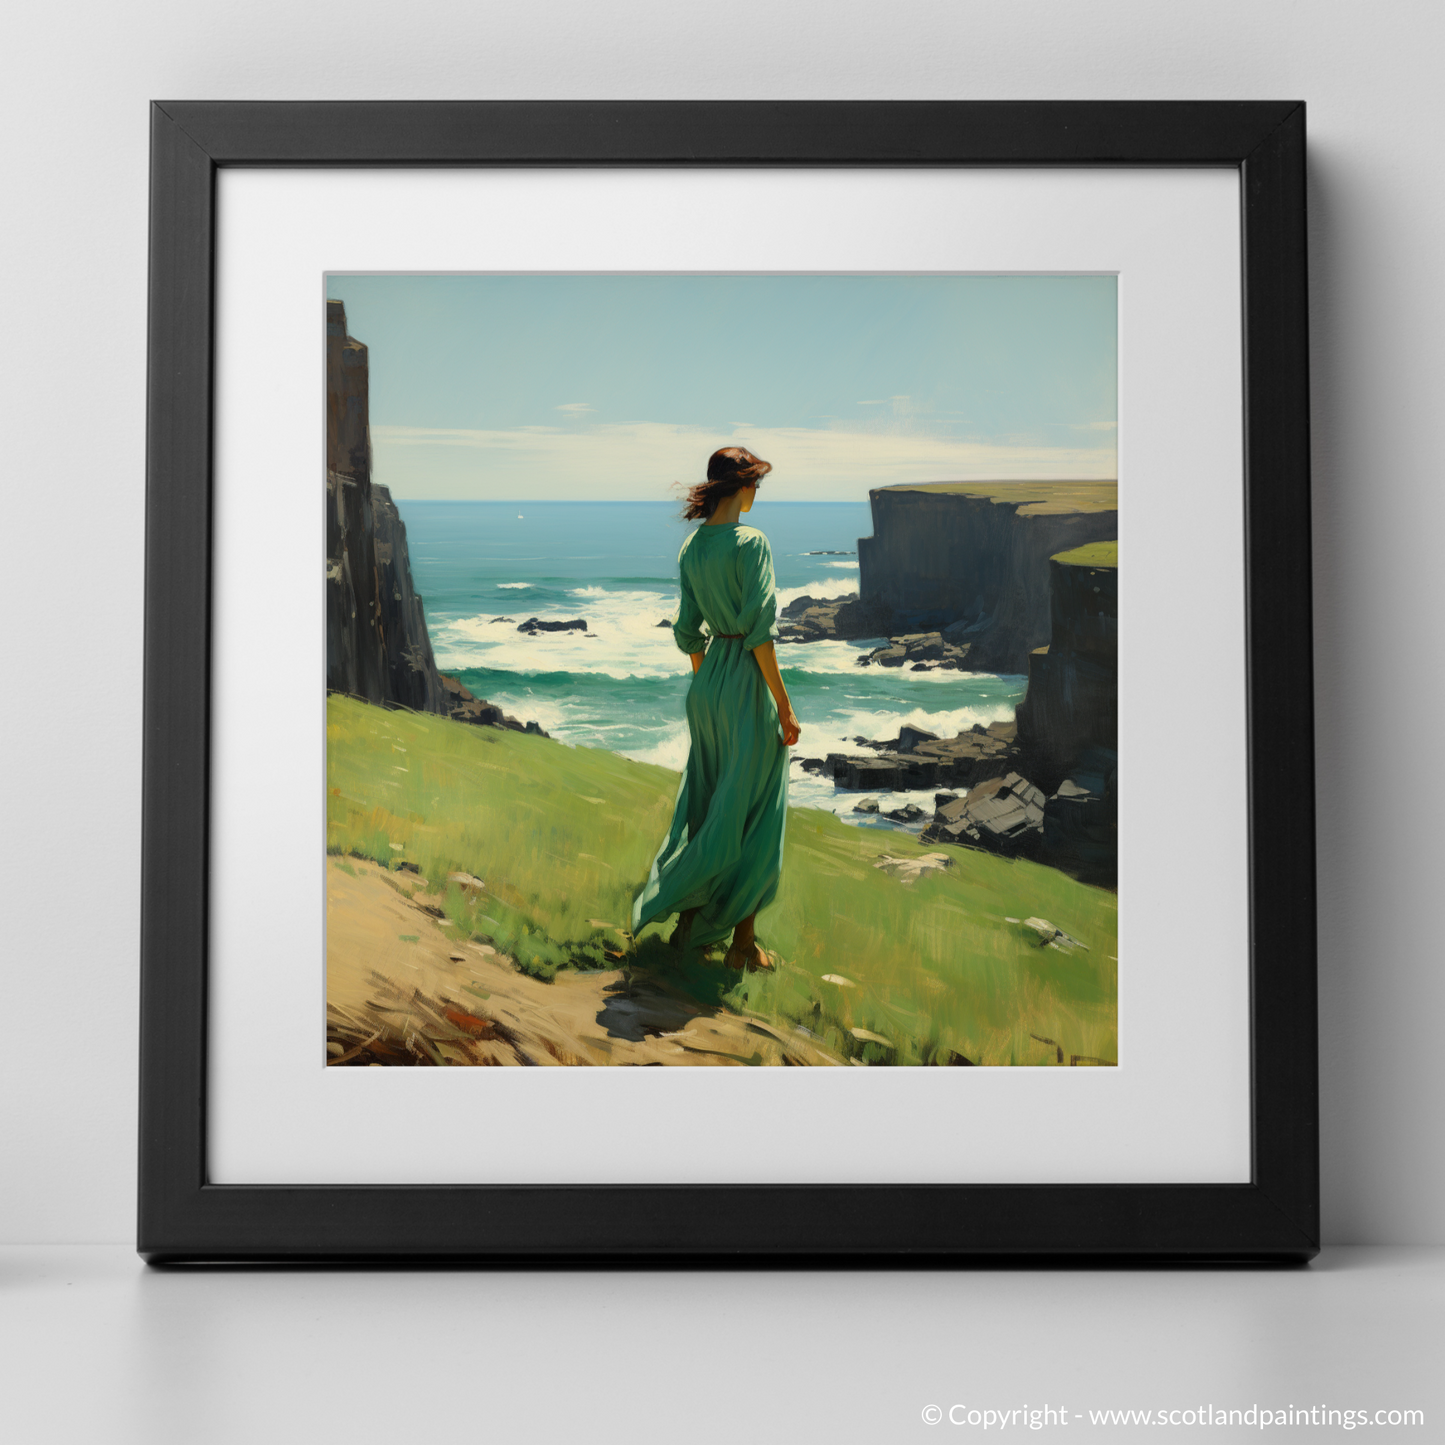 Caithness Cliffs: The Sentinel of Scotland's Shore